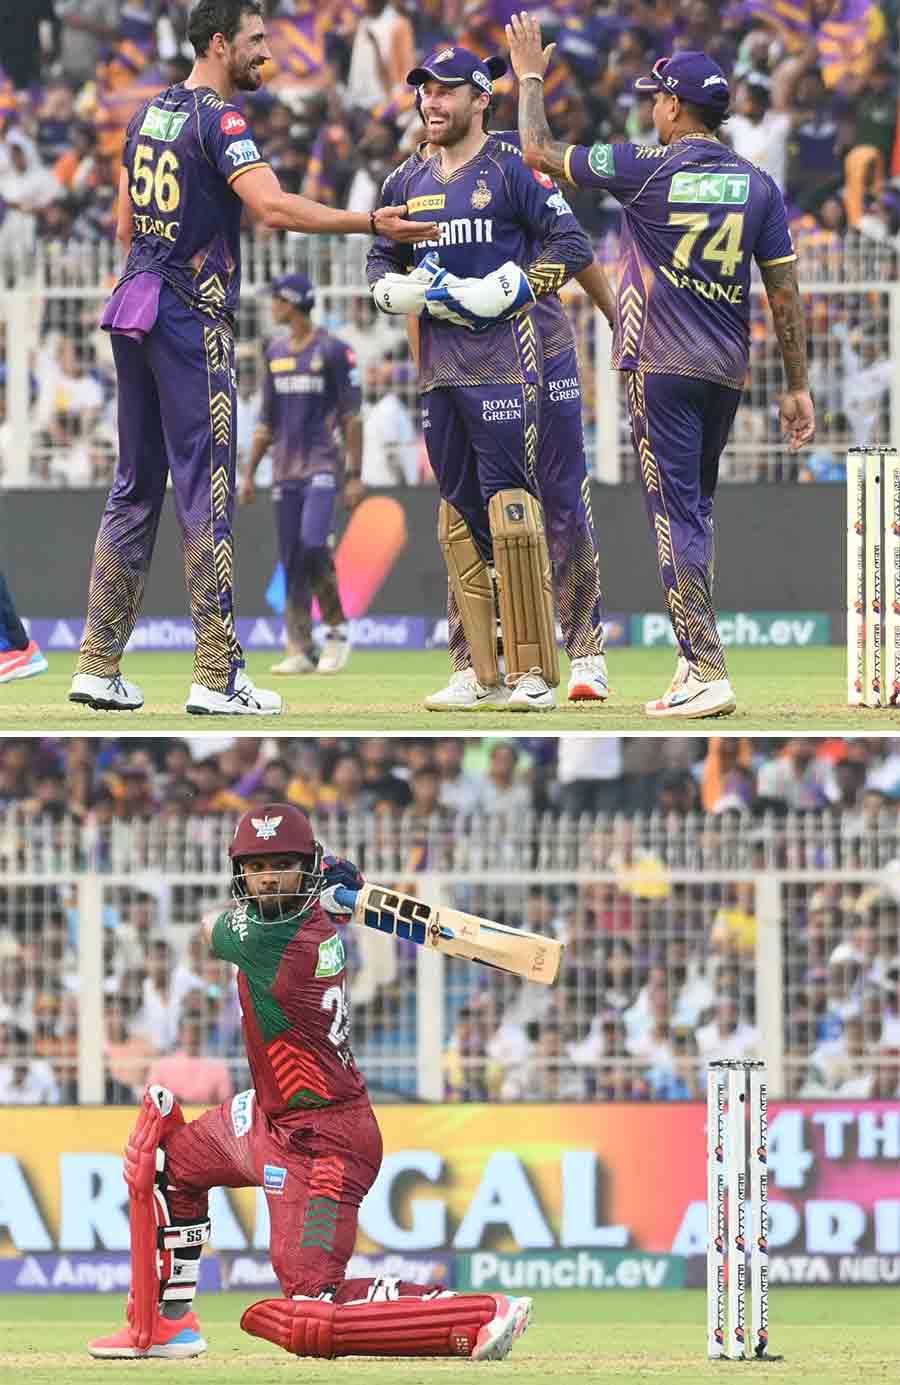 KKR fans got their Poila Baisakh gift as the home team won the match by eight wickets against LSG, who played in Mohun Bagan colours  